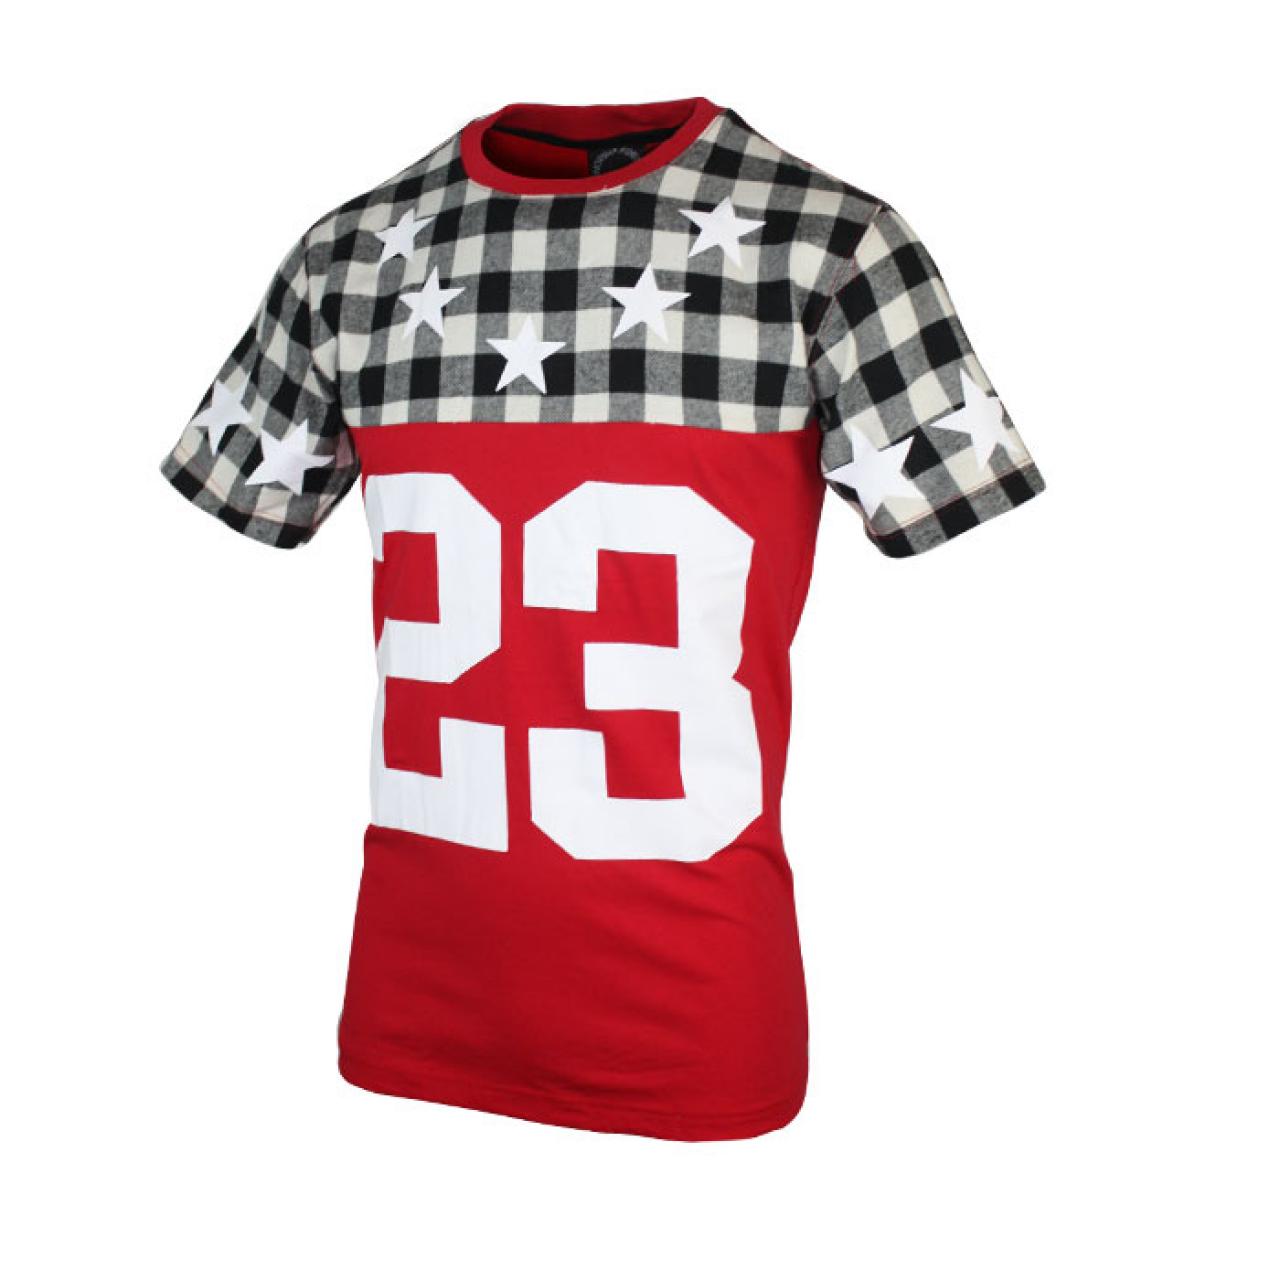 Men's USA Basketball Sport T Shirt Design Red With Black And White Checkered Box